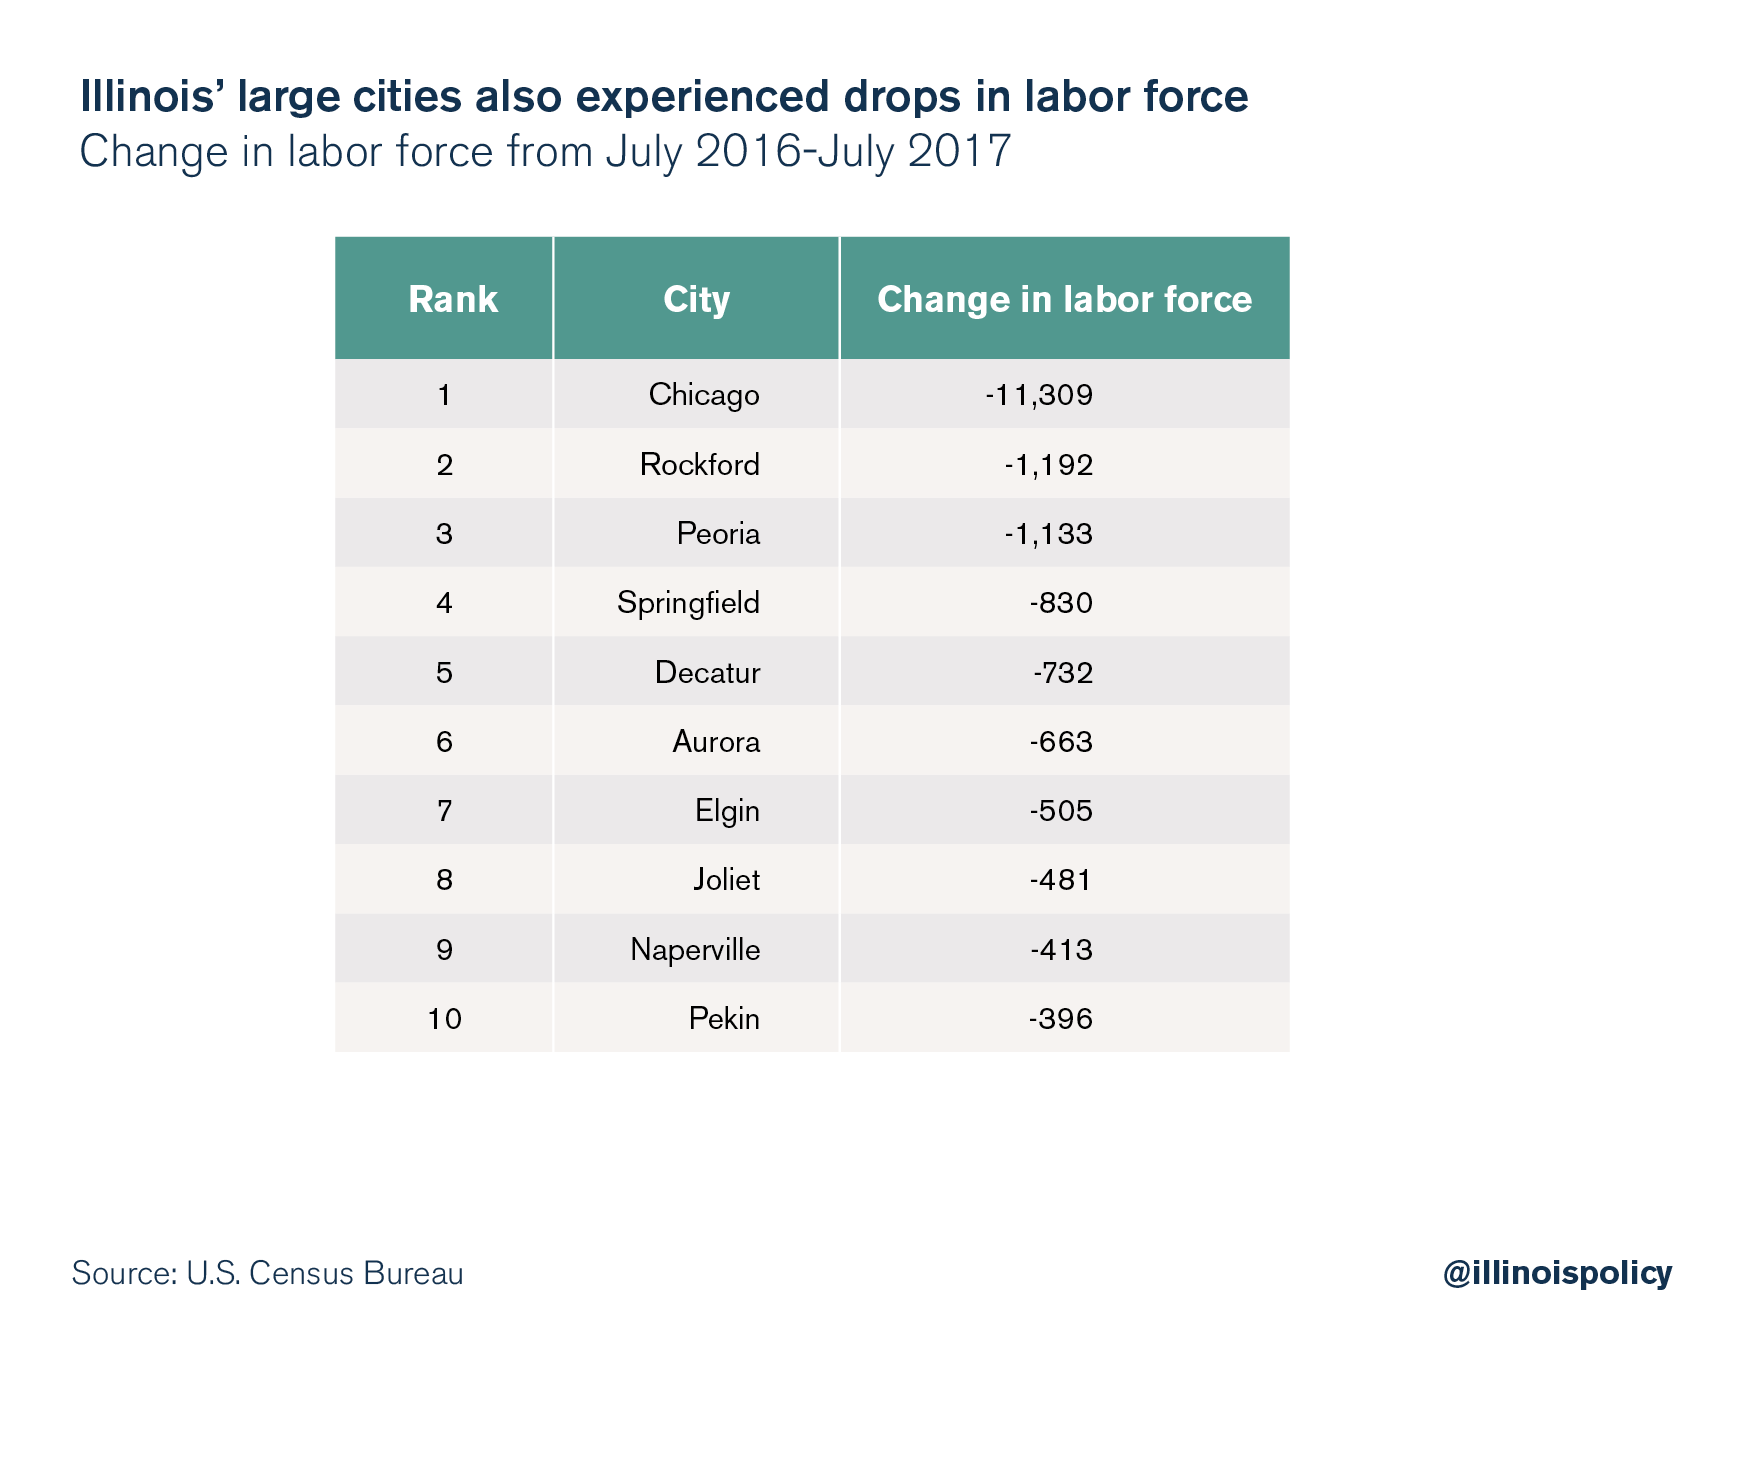 Illinois' large cities also experienced drops in labor force